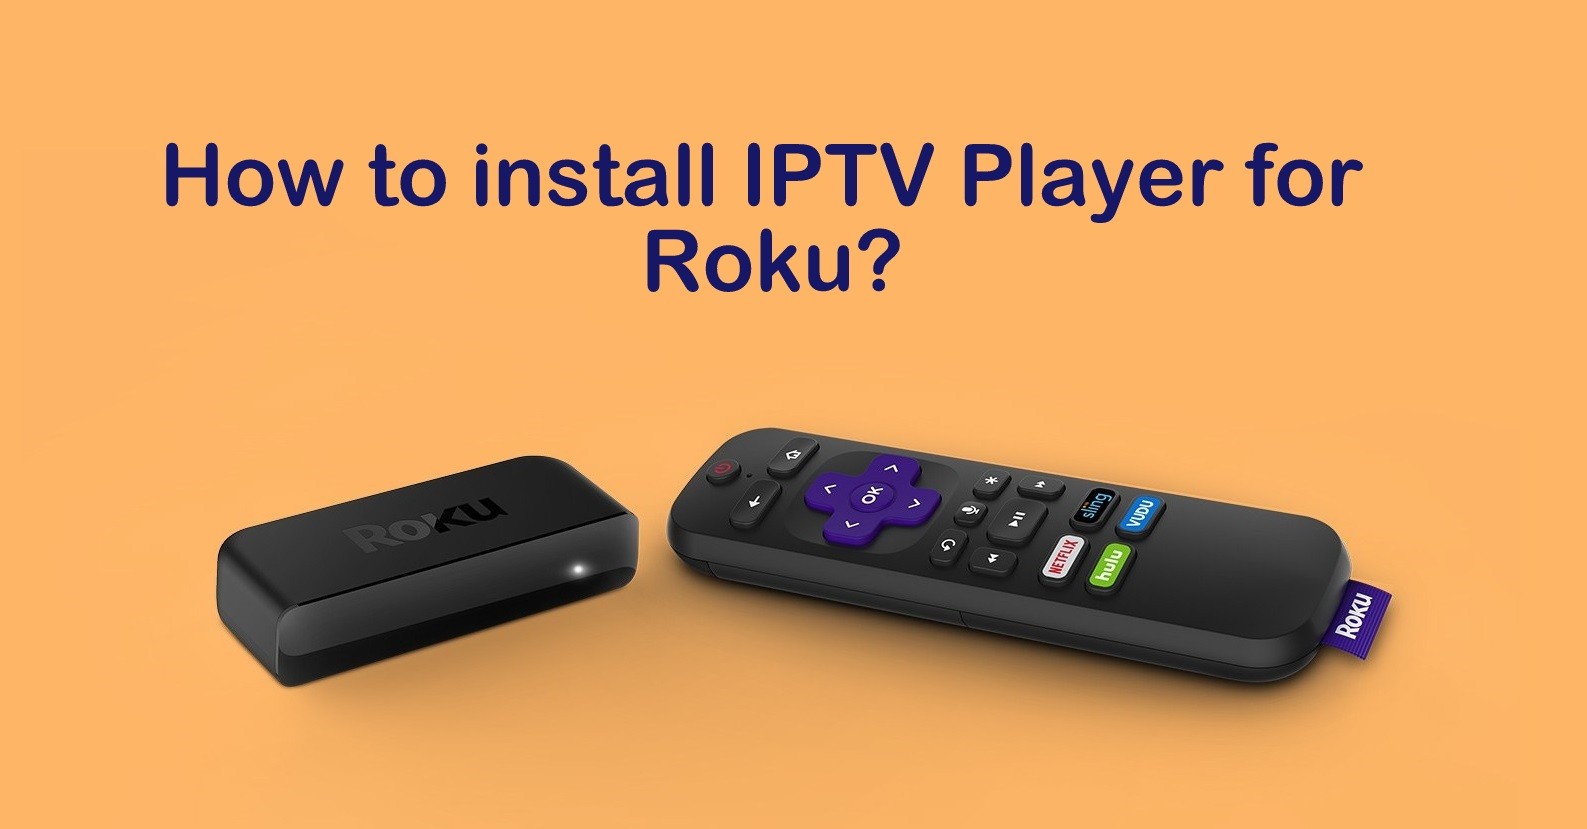 How to Install IPTV Player on Roku